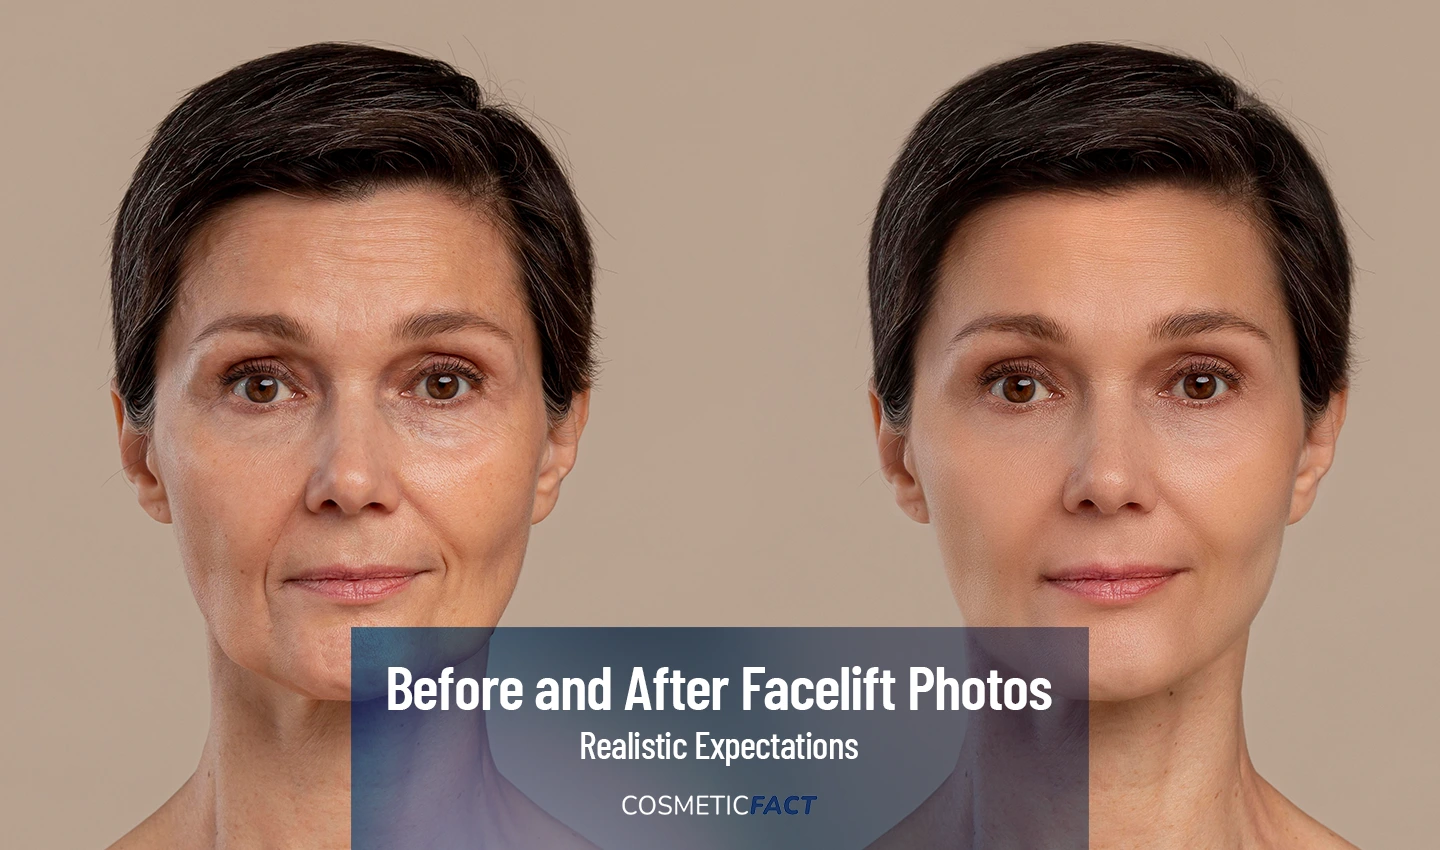 Facelift Before and After Photos - Analyzing Results and Setting Realistic Expectations